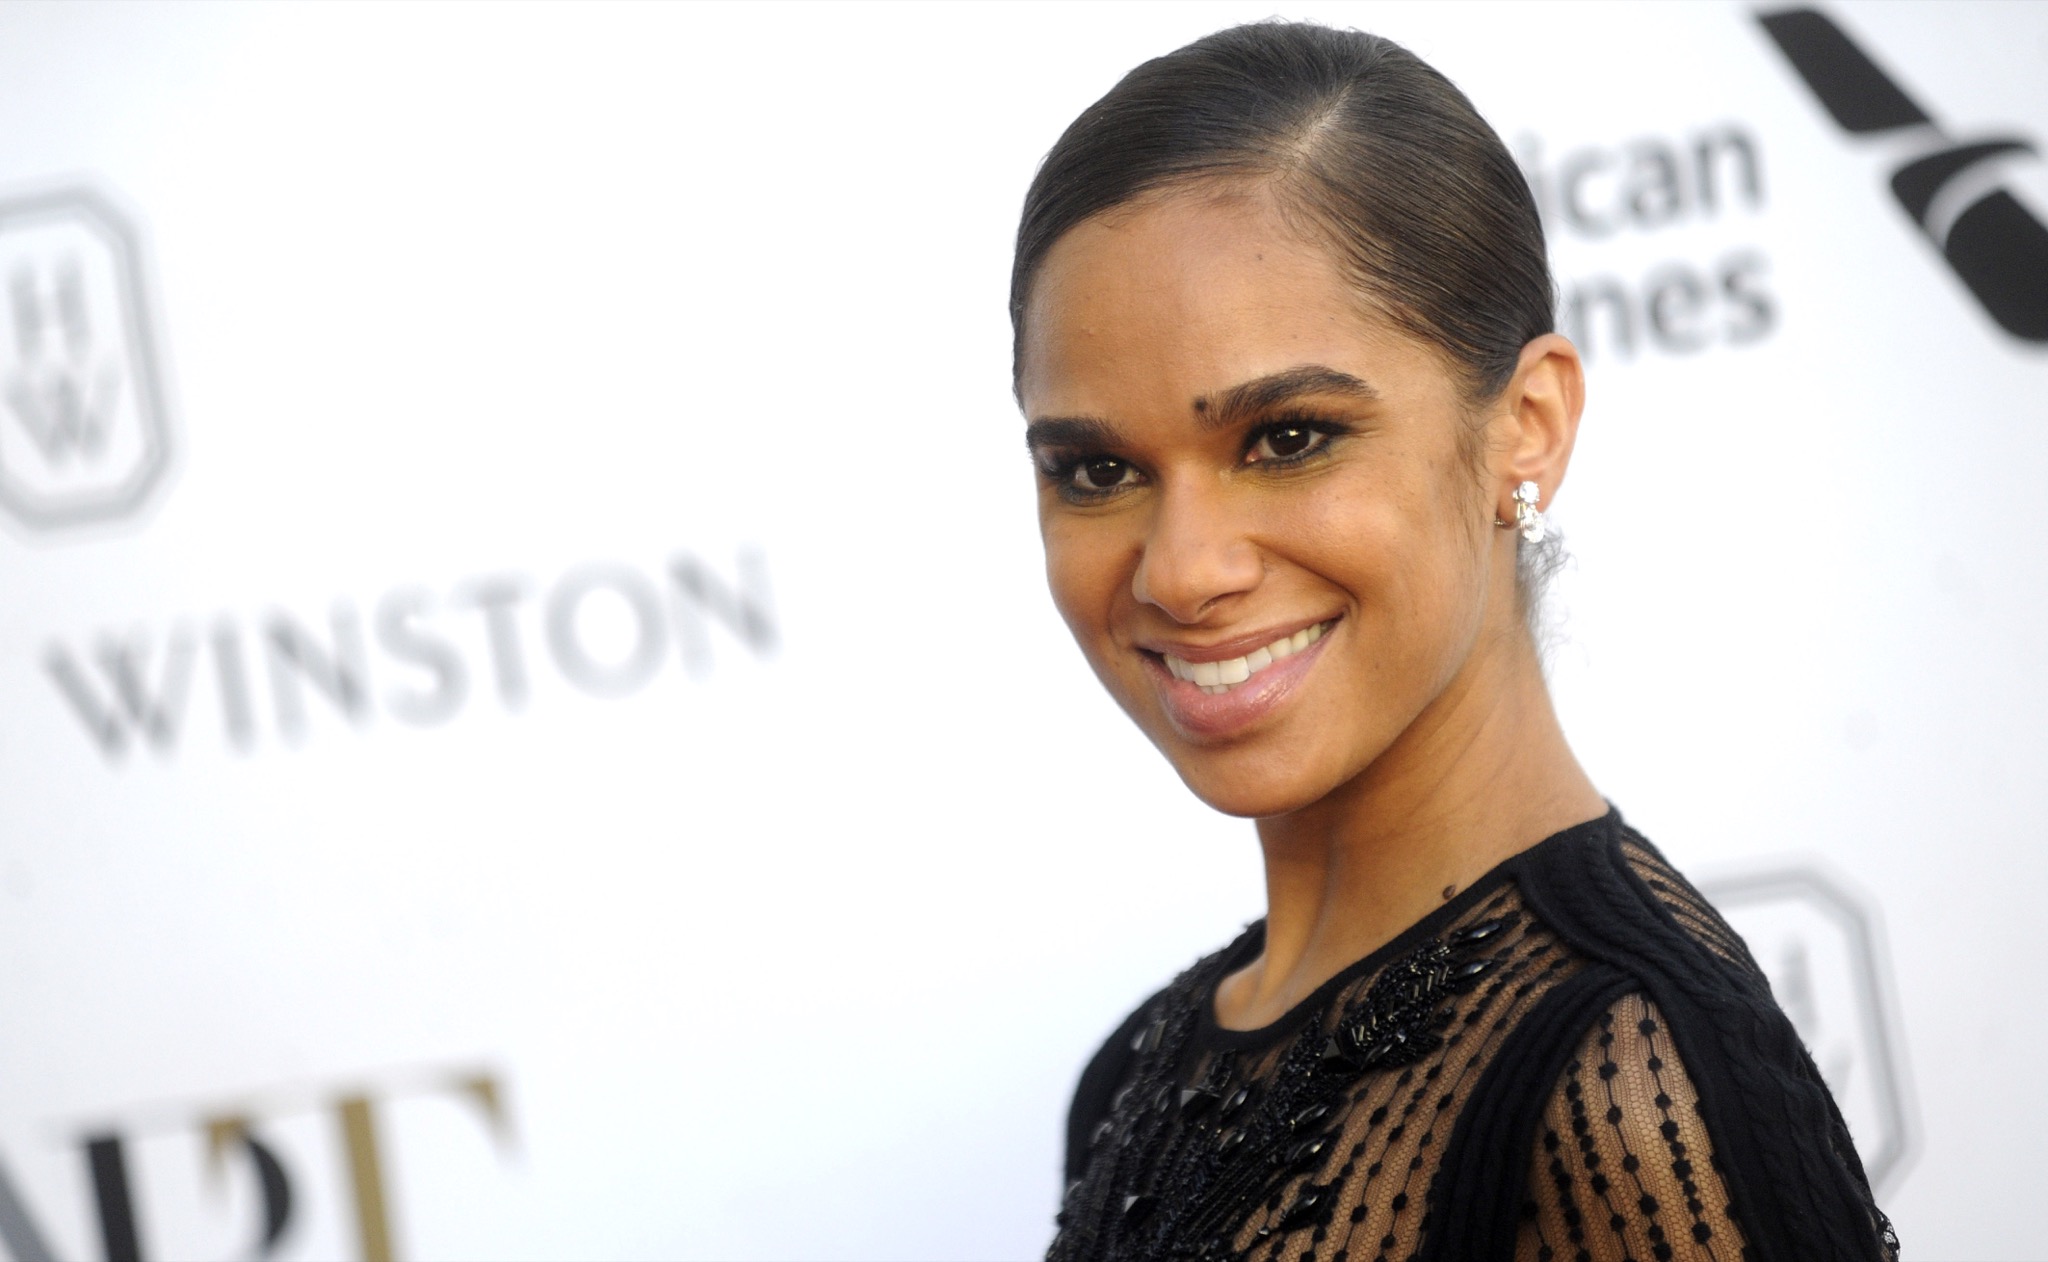 Has Misty Copeland Had Plastic Surgery? Body Measurements and More!